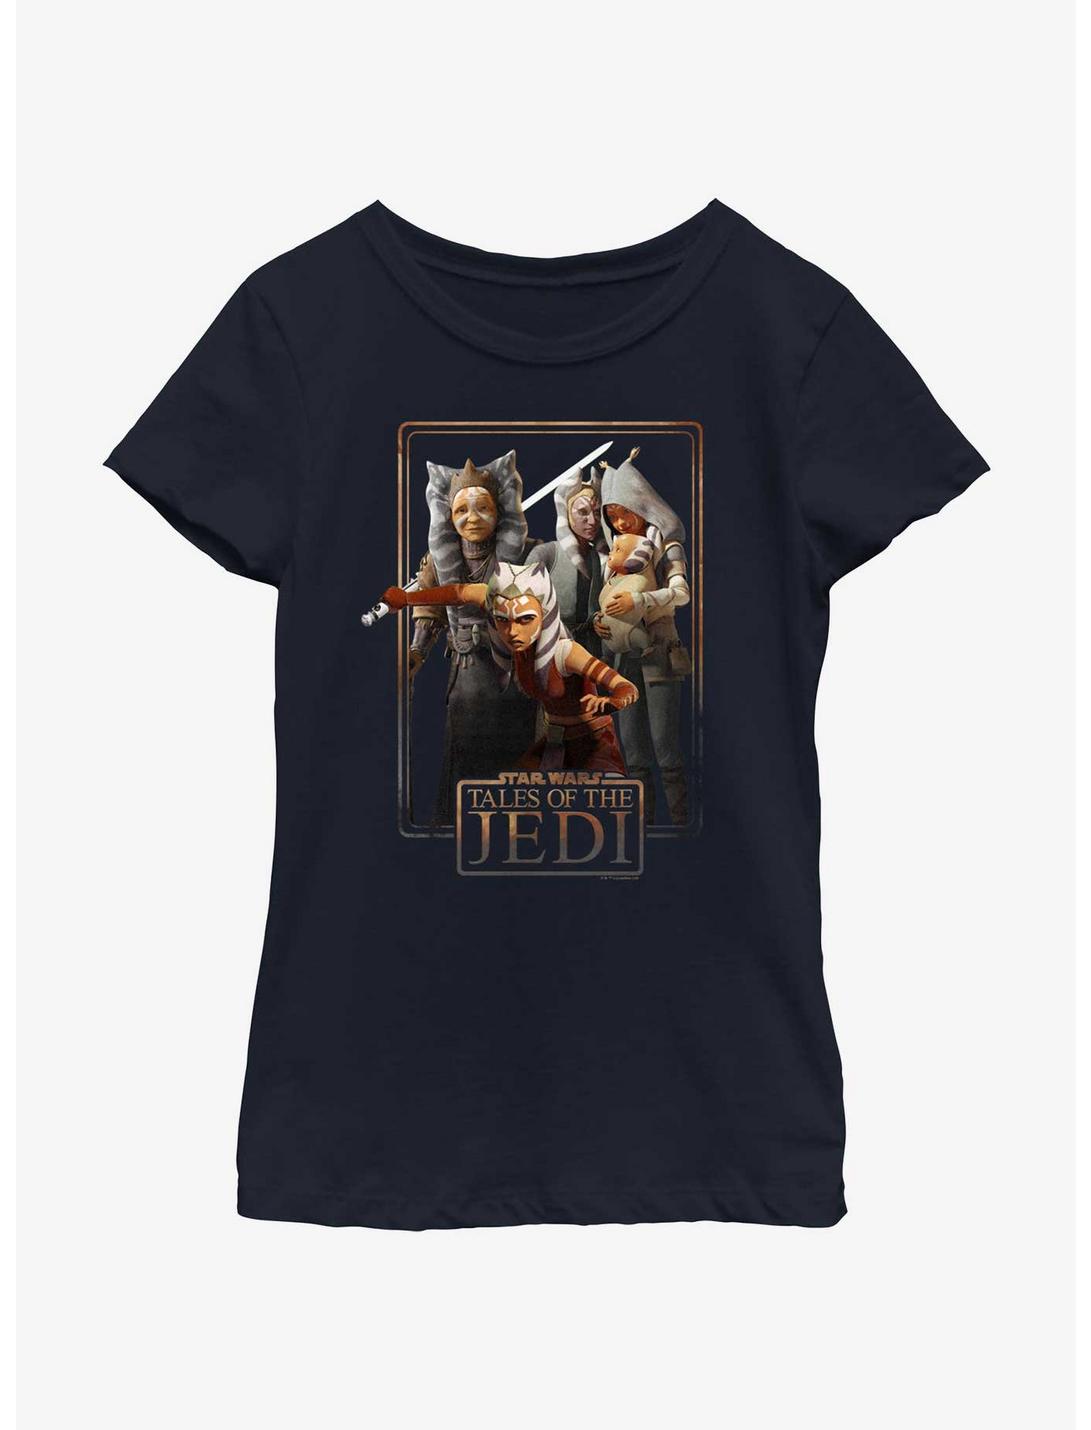 Star Wars: Tales of the Jedi Togruta Family Poster Youth Girls T-Shirt, NAVY, hi-res